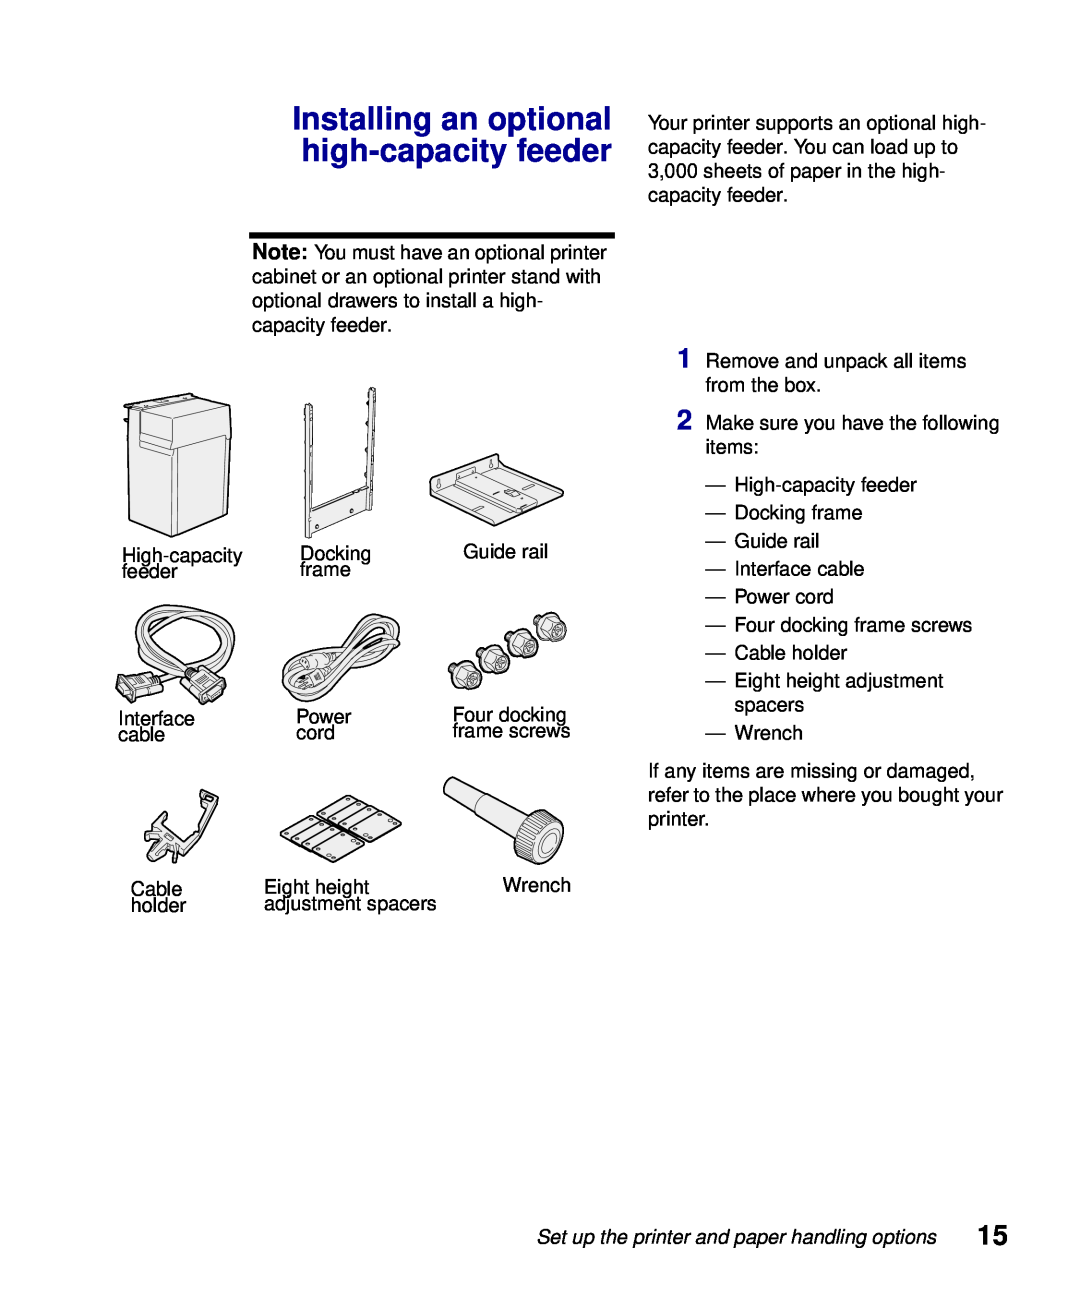 Lexmark S510-2222-00 setup guide Installing an optional high-capacityfeeder, Set up the printer and paper handling options 